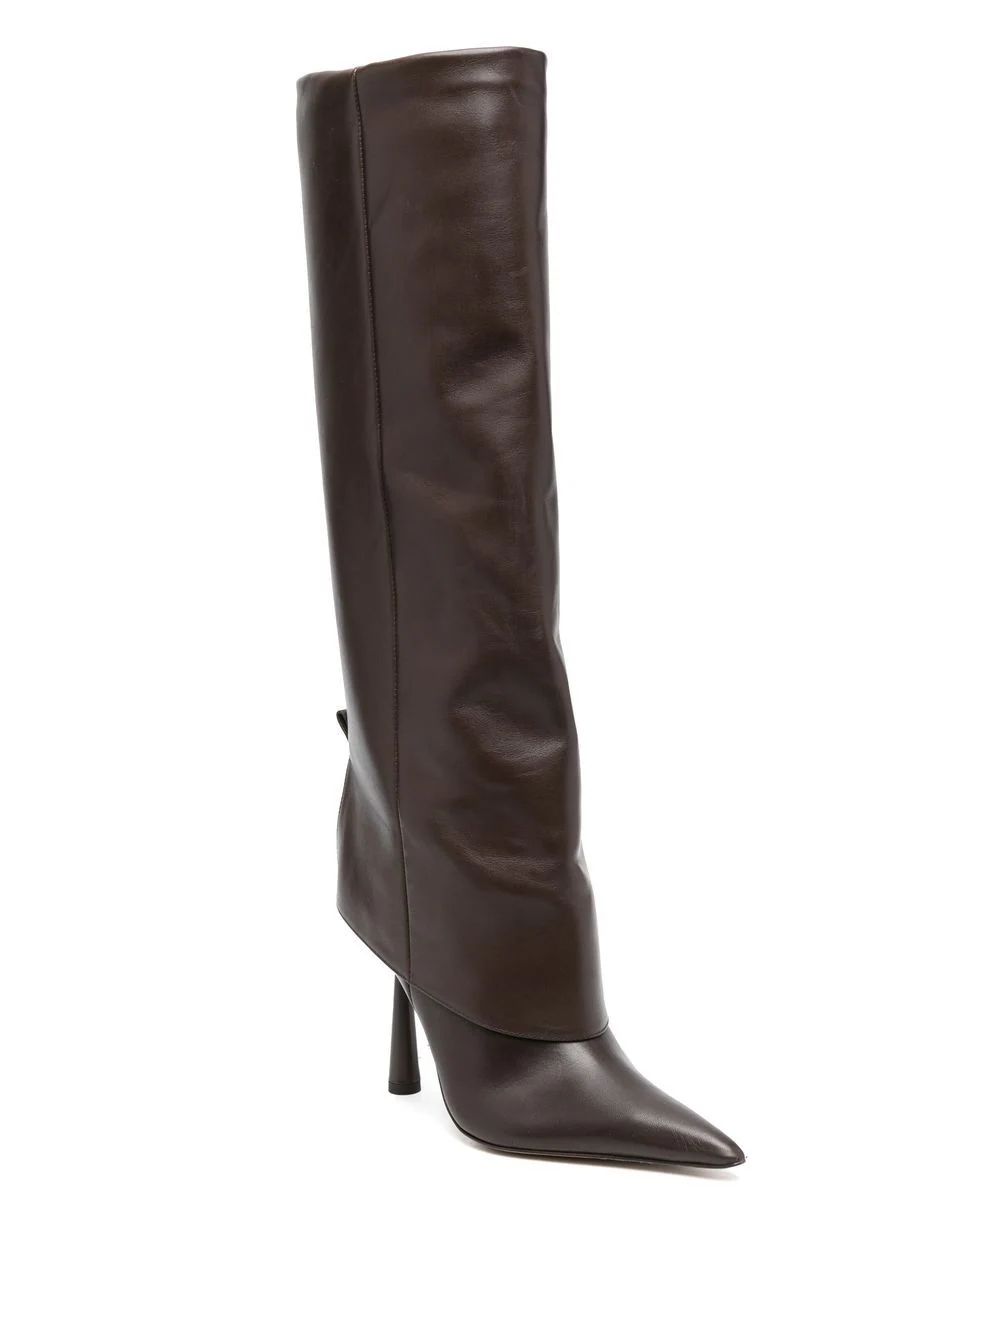 110mm knee-high leather boots | Farfetch Global